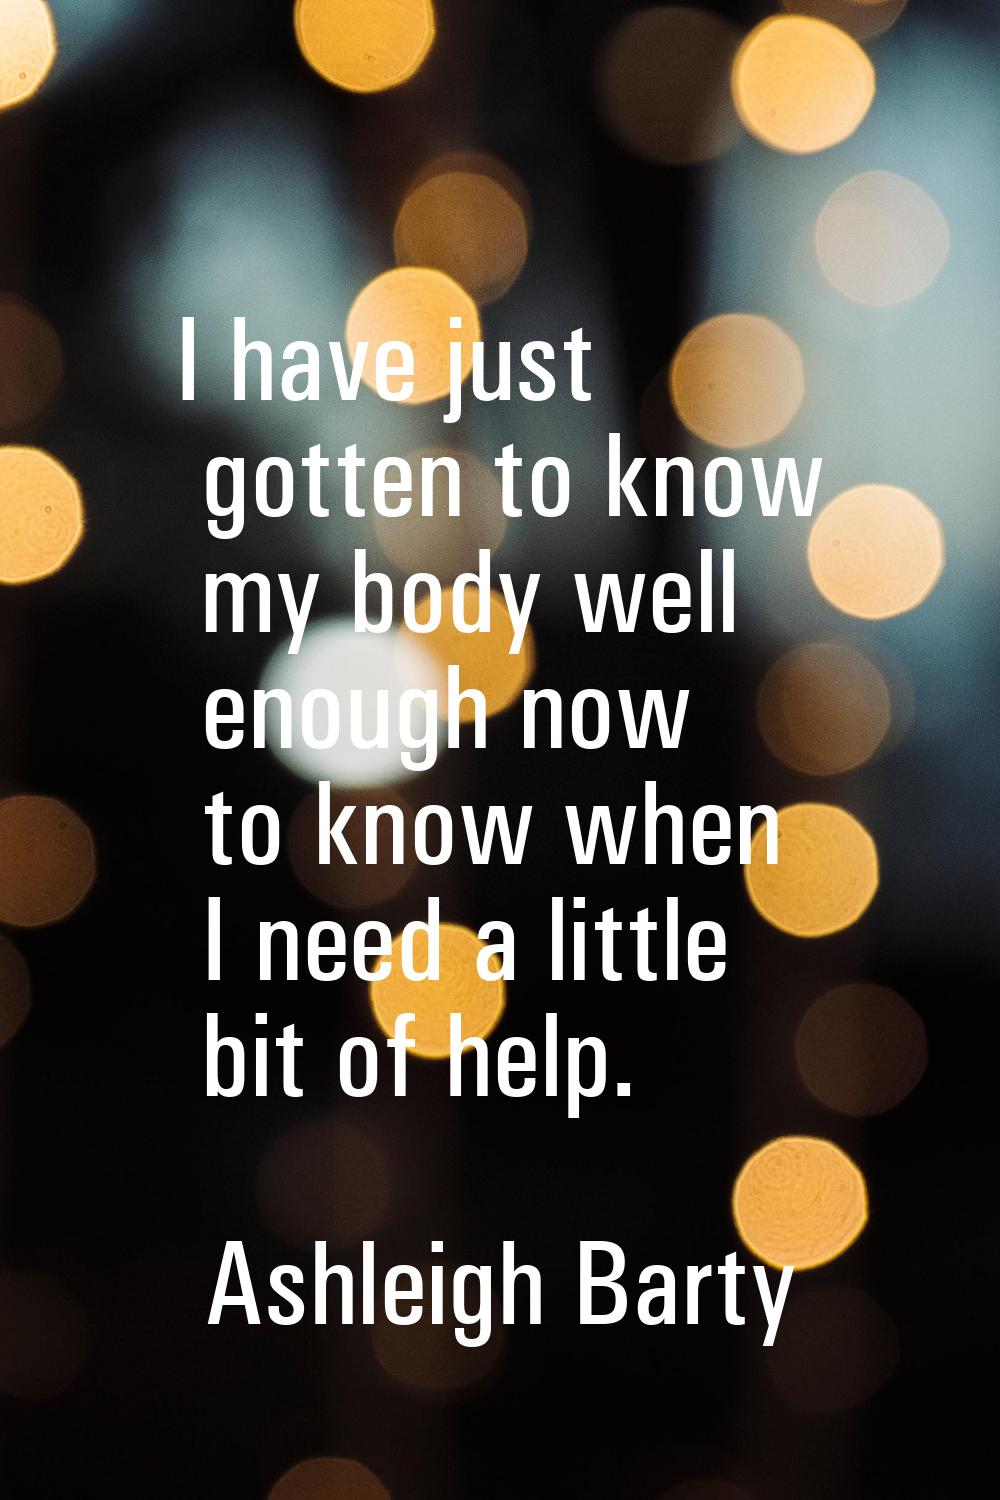 I have just gotten to know my body well enough now to know when I need a little bit of help.